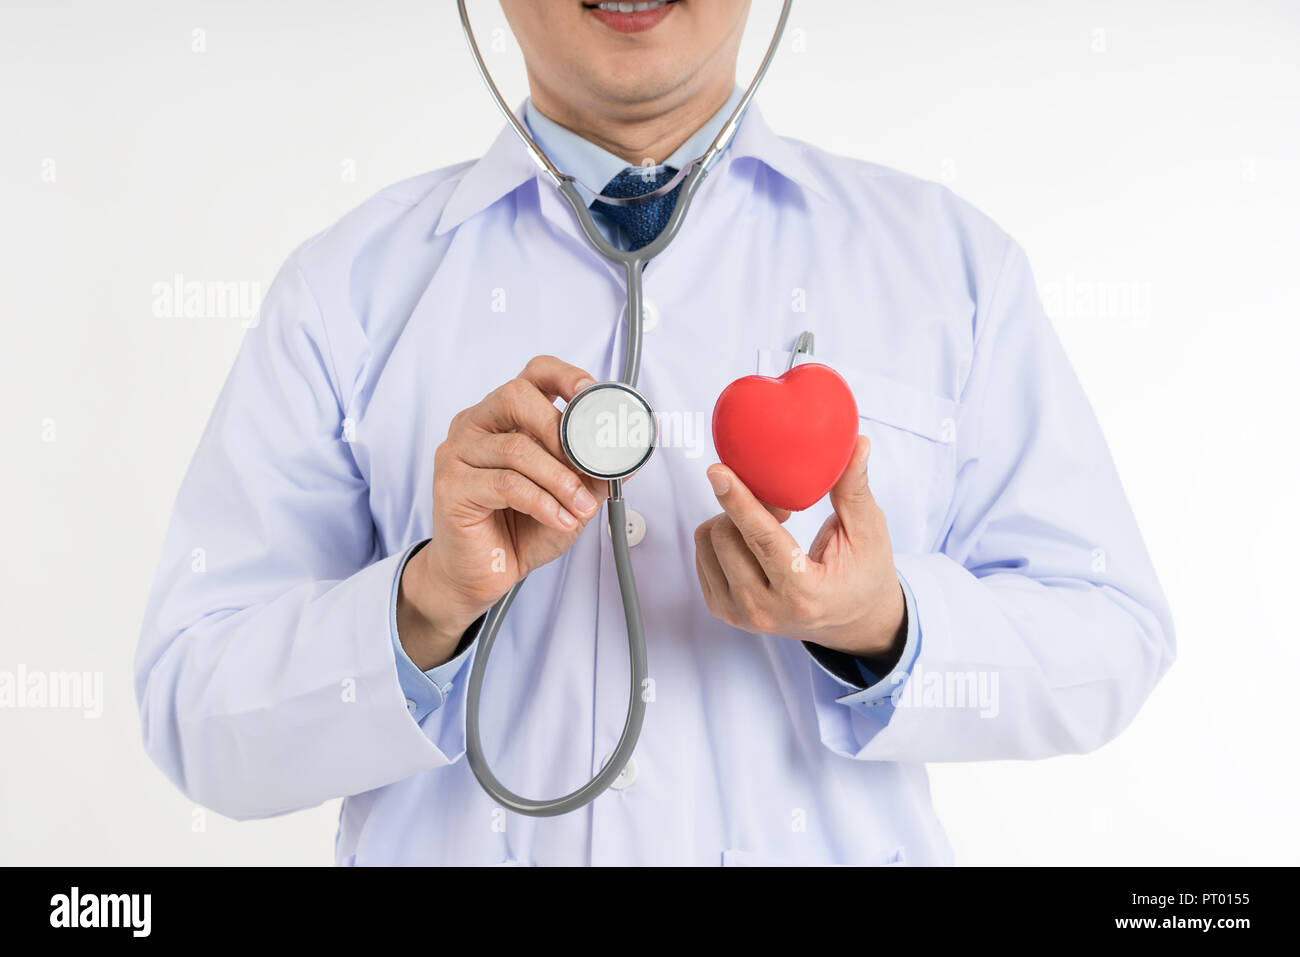 Doctor Coat Medical Stethoscope Red Heart Stock Photo 1236871573